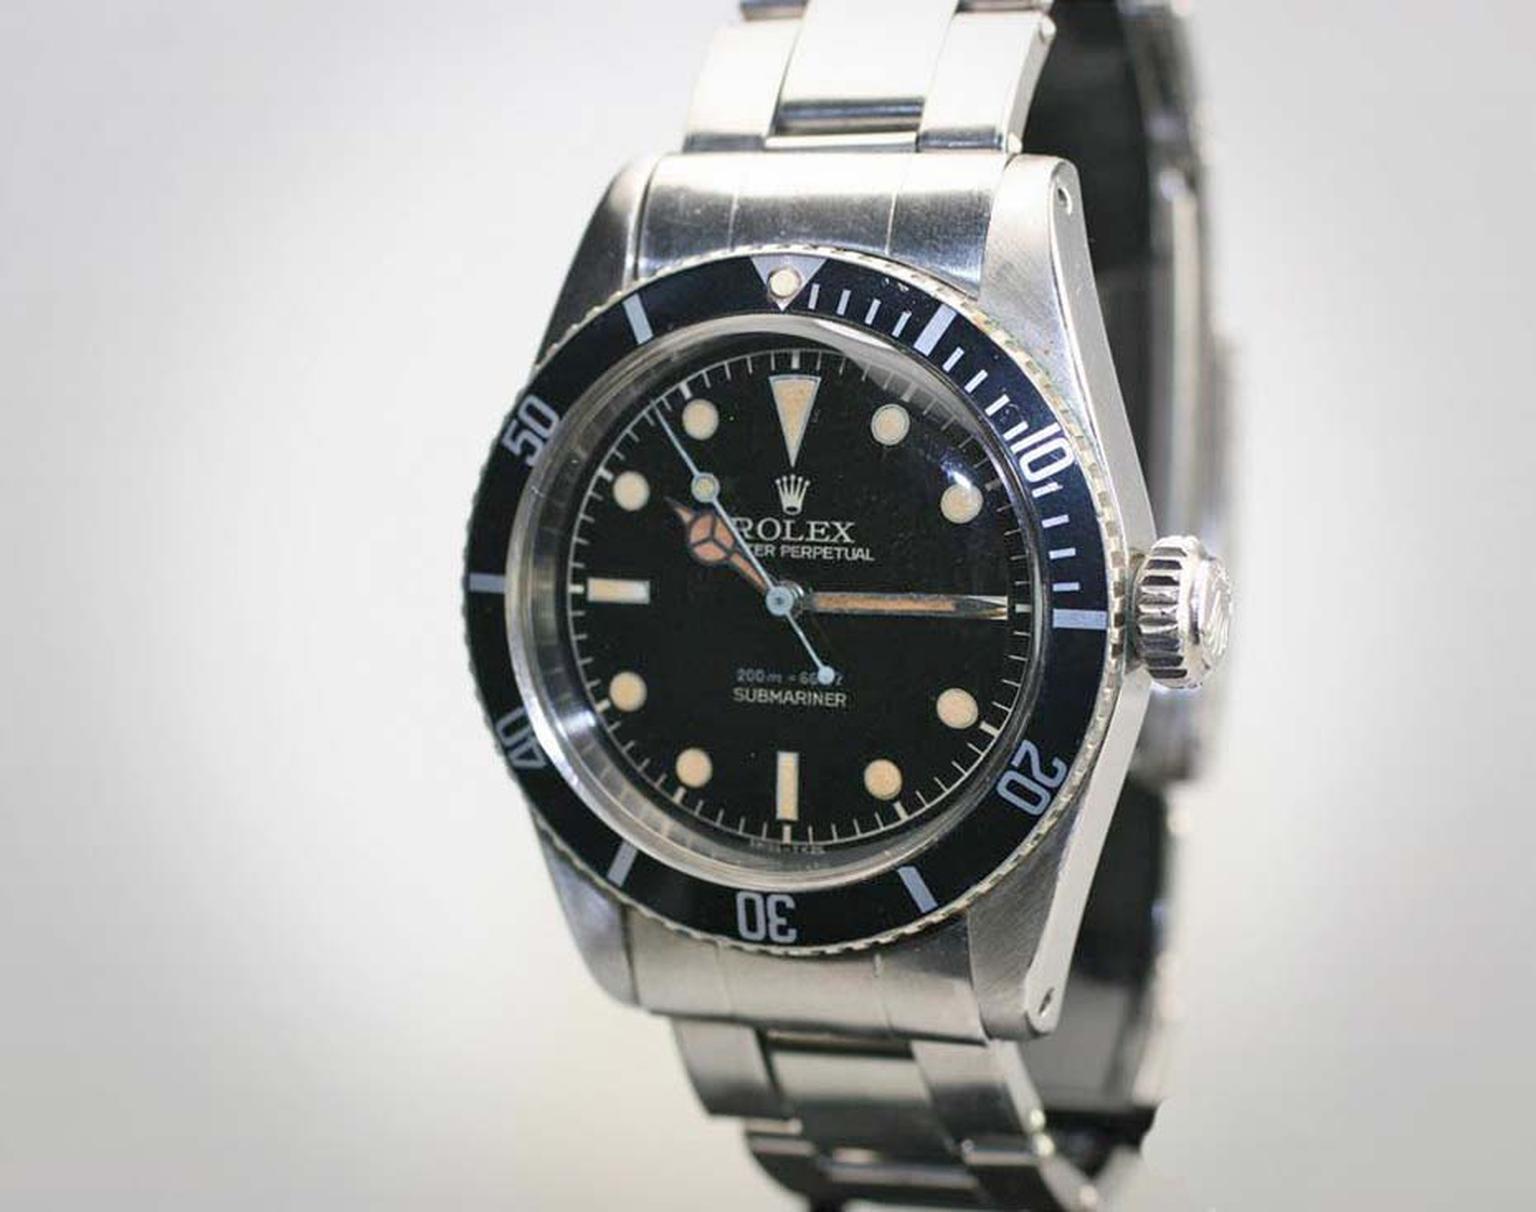 The Rolex Submariner was the first diving watch capable of withstanding depths of 100 metres and the official watch of the Royal Navy.